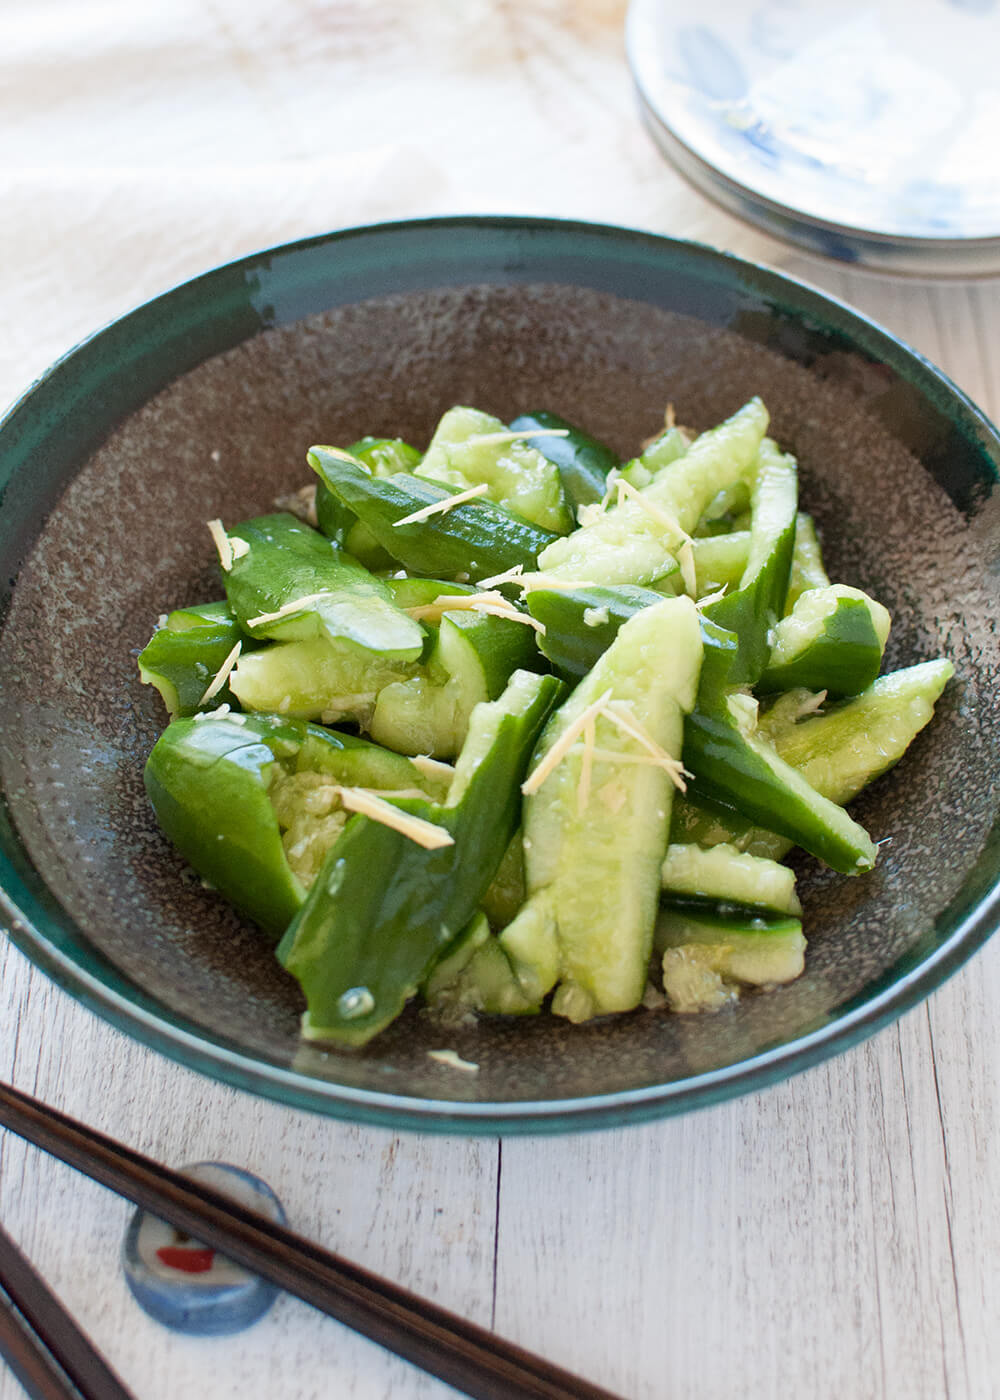 Tataki kyuri is a simple but unique cucumber salad. By smashing the cucumbers, the dressing penetrates into each piece. Ginger and soy sauce in the dressing gives this salad a Japanese touch.